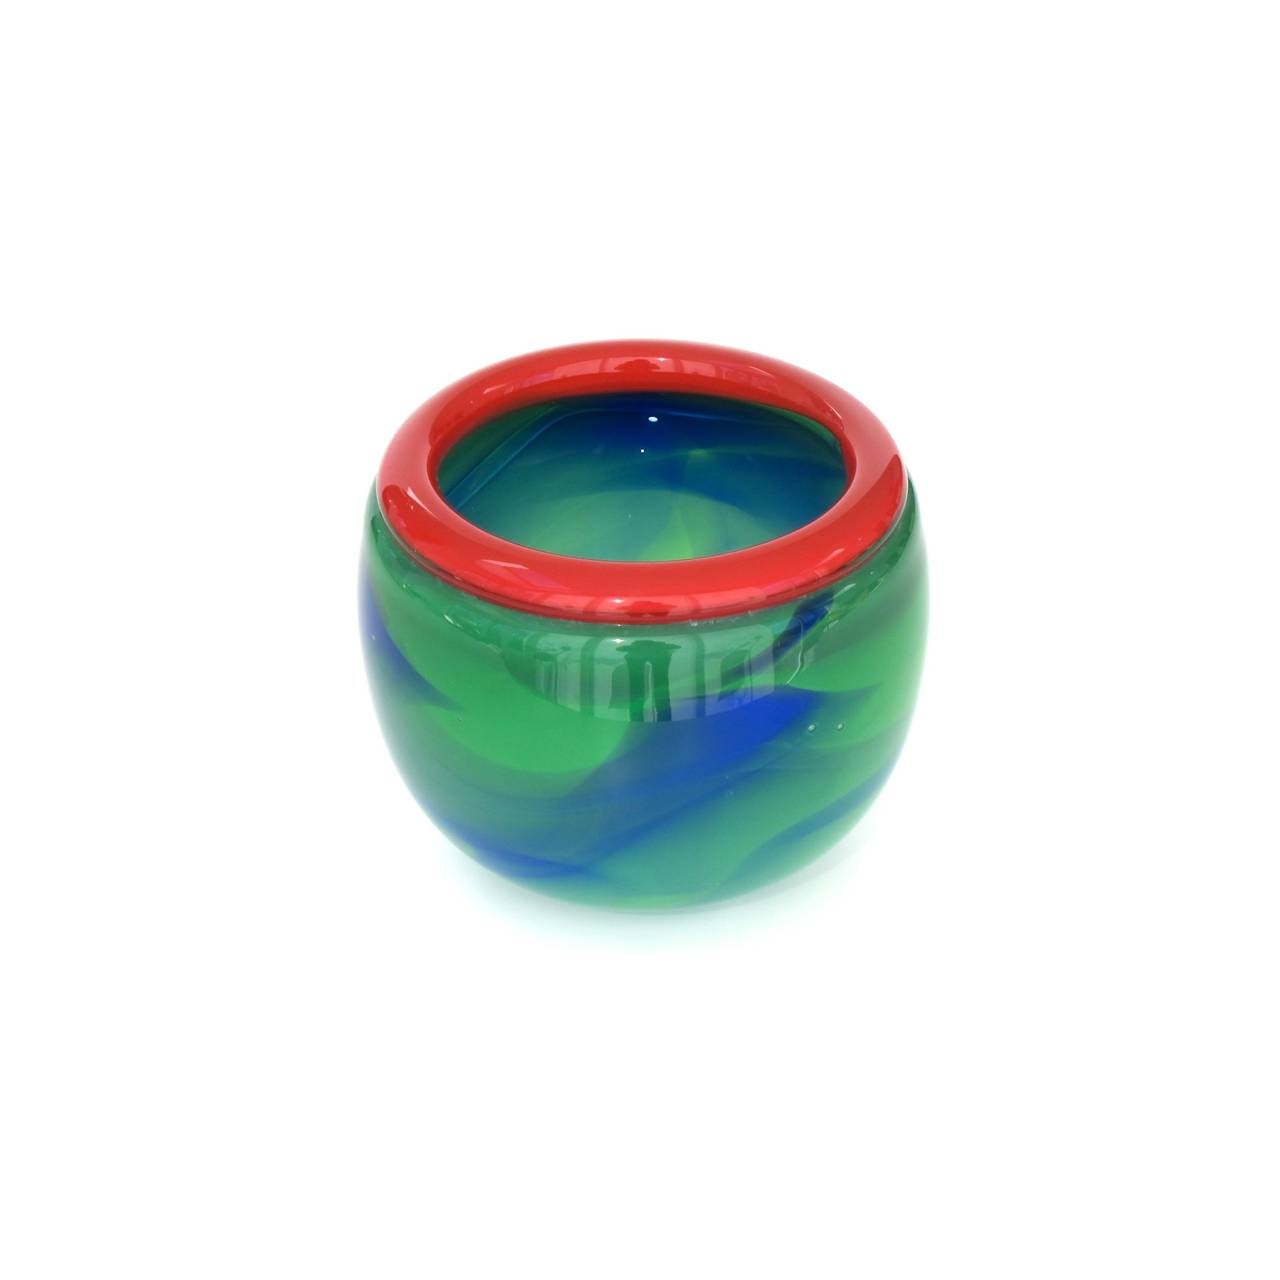 A thick-walled blue and green glass bowl with red rim by Misha Ignis (1953). This piece of art glass is signed 